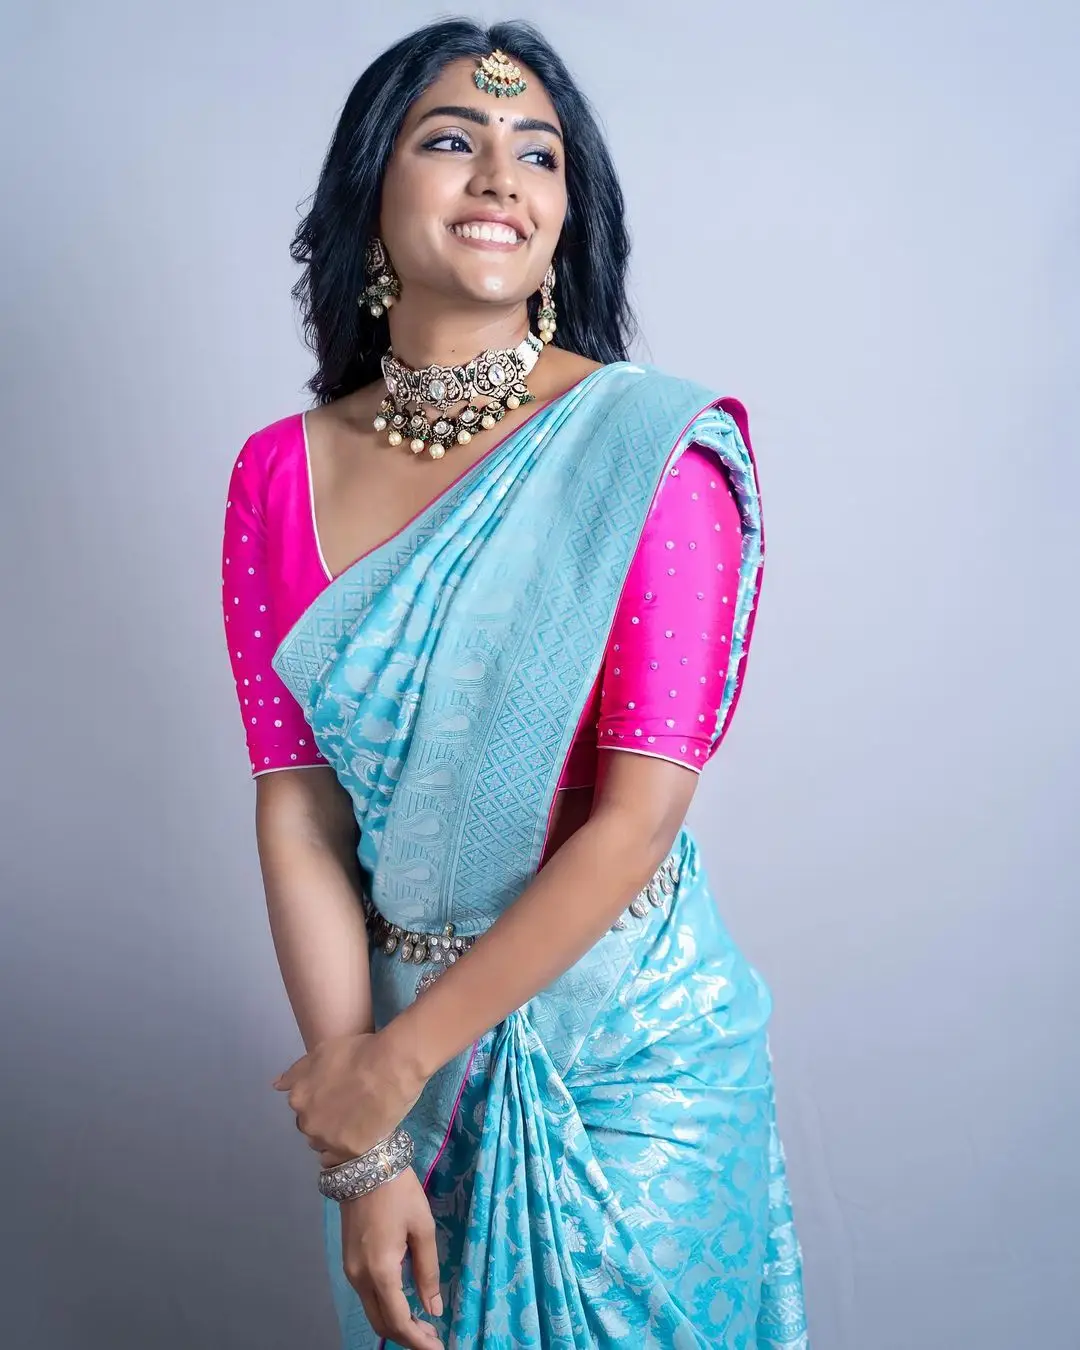 EESHA REBBA IN SOUTH INDIAN TRADITIONAL BLUE SAREE PINK BLOUSE 2